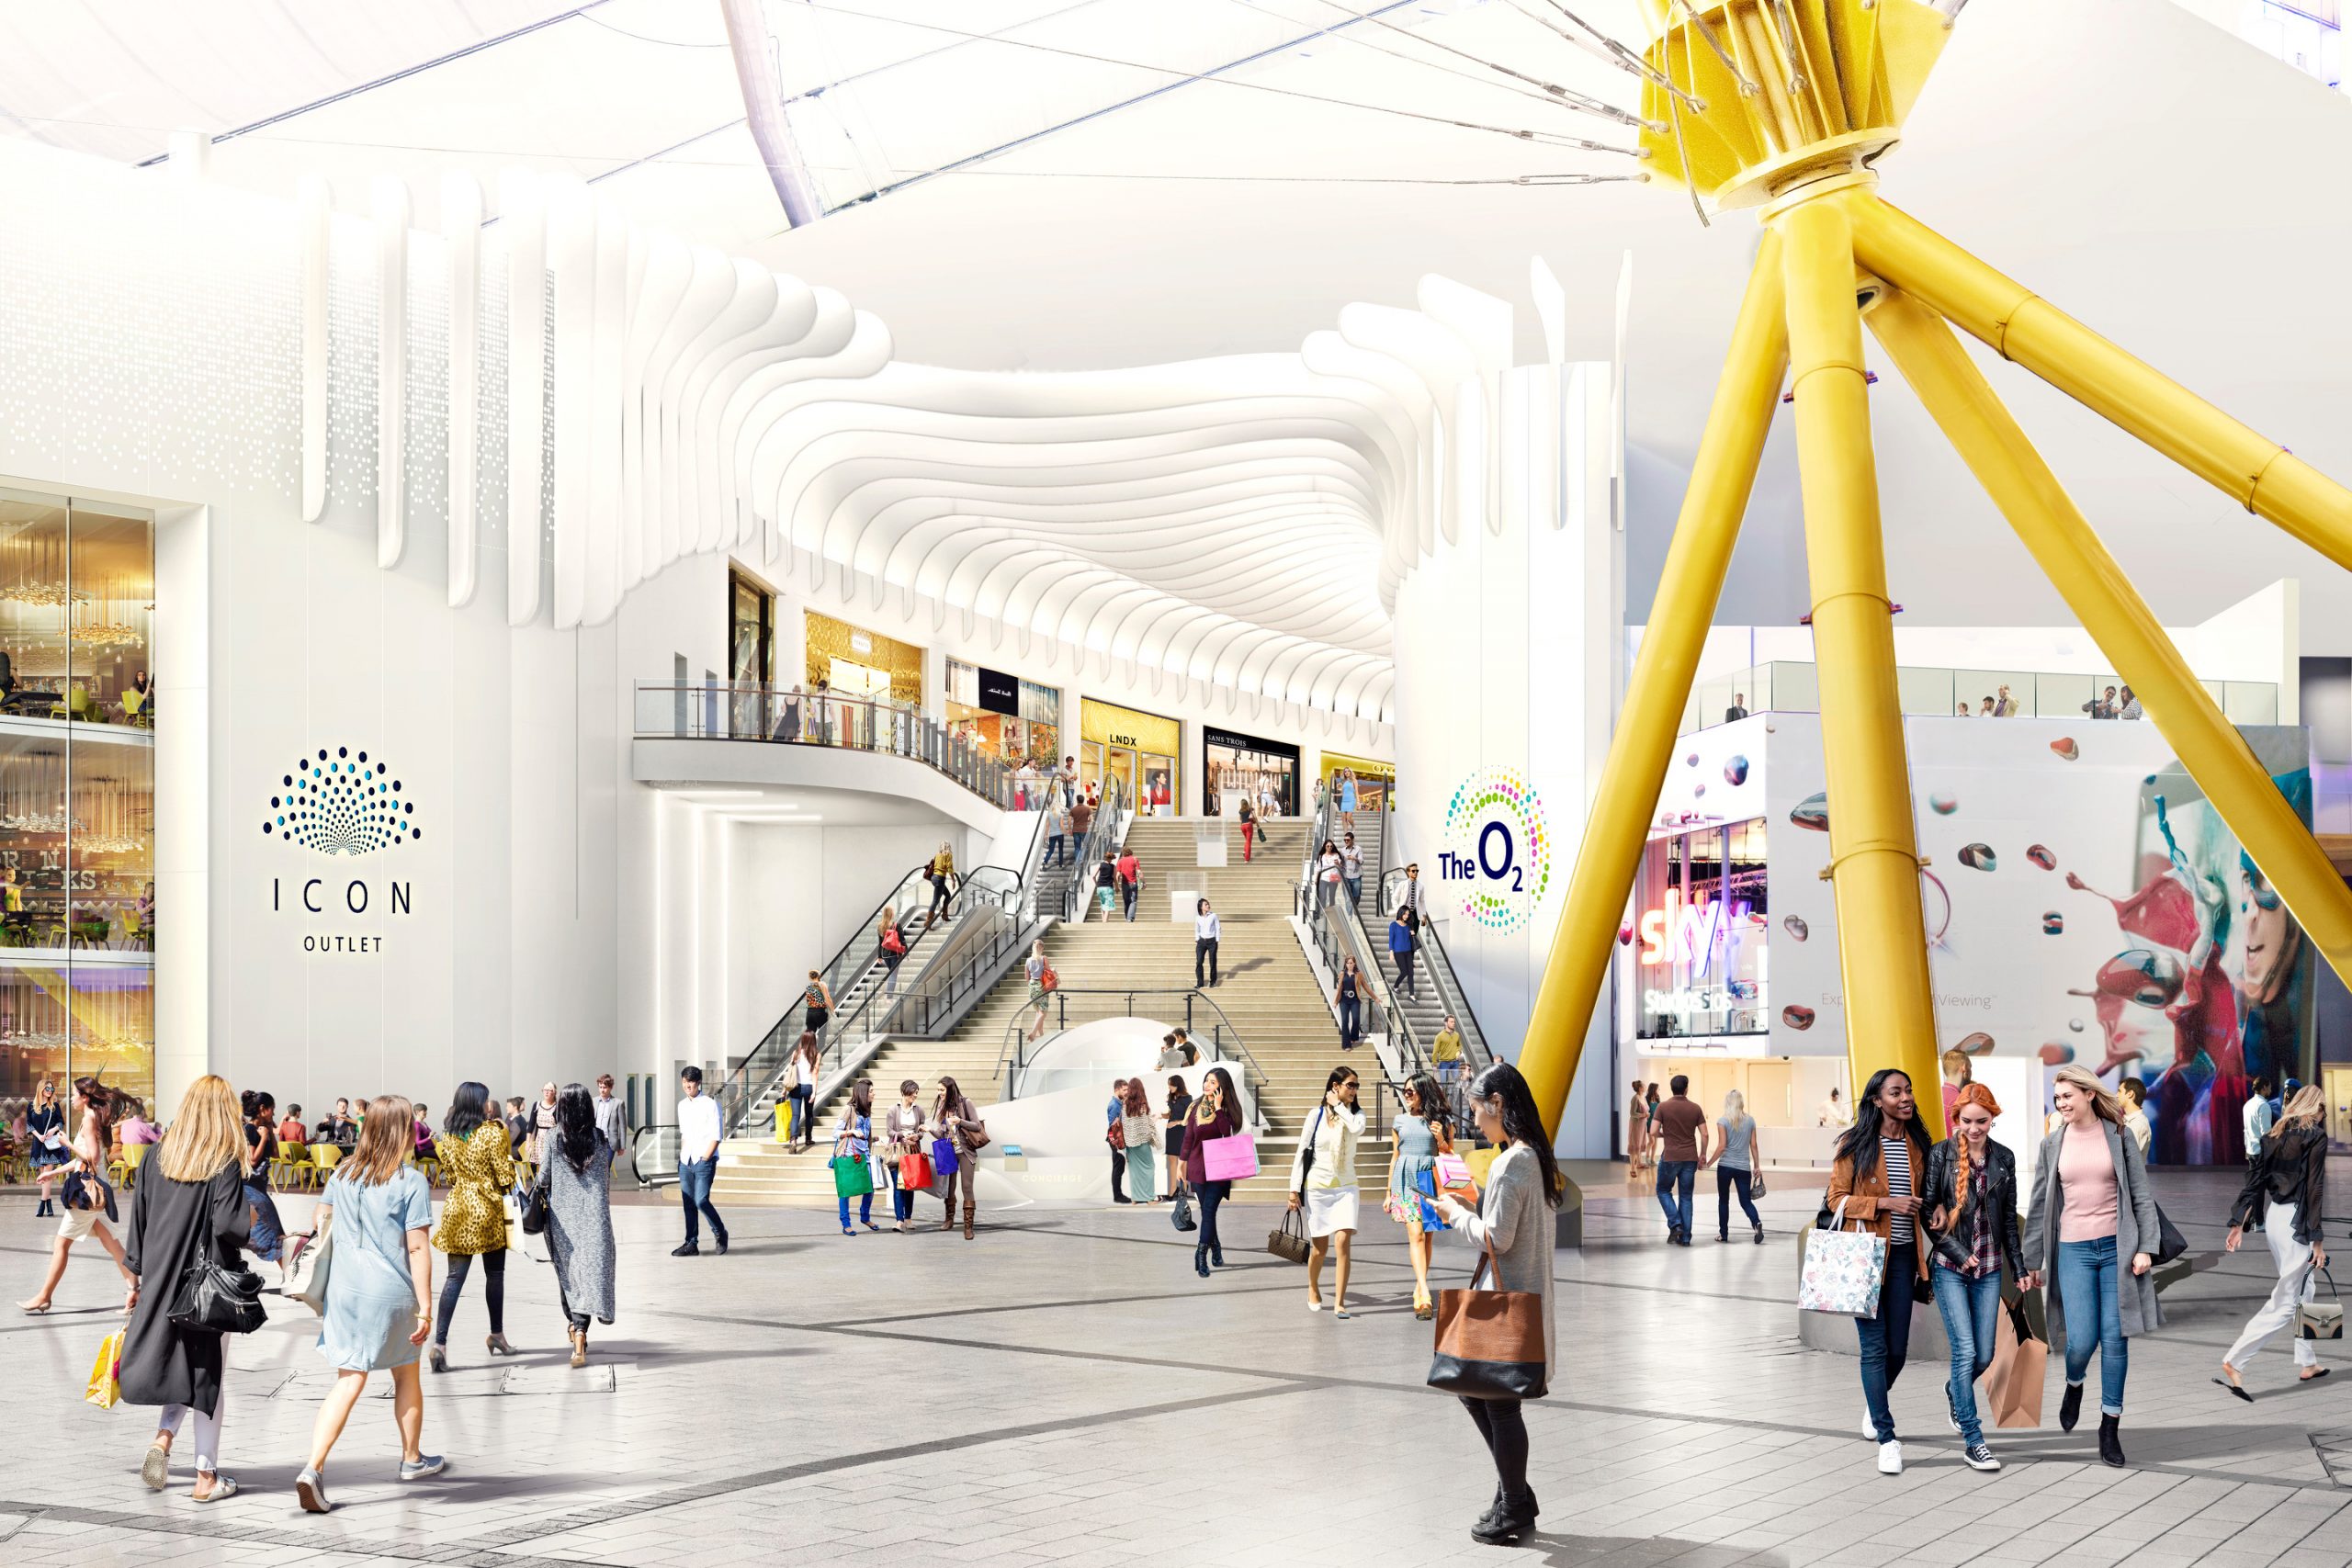 ICON Outlet to add shopping to The O2 